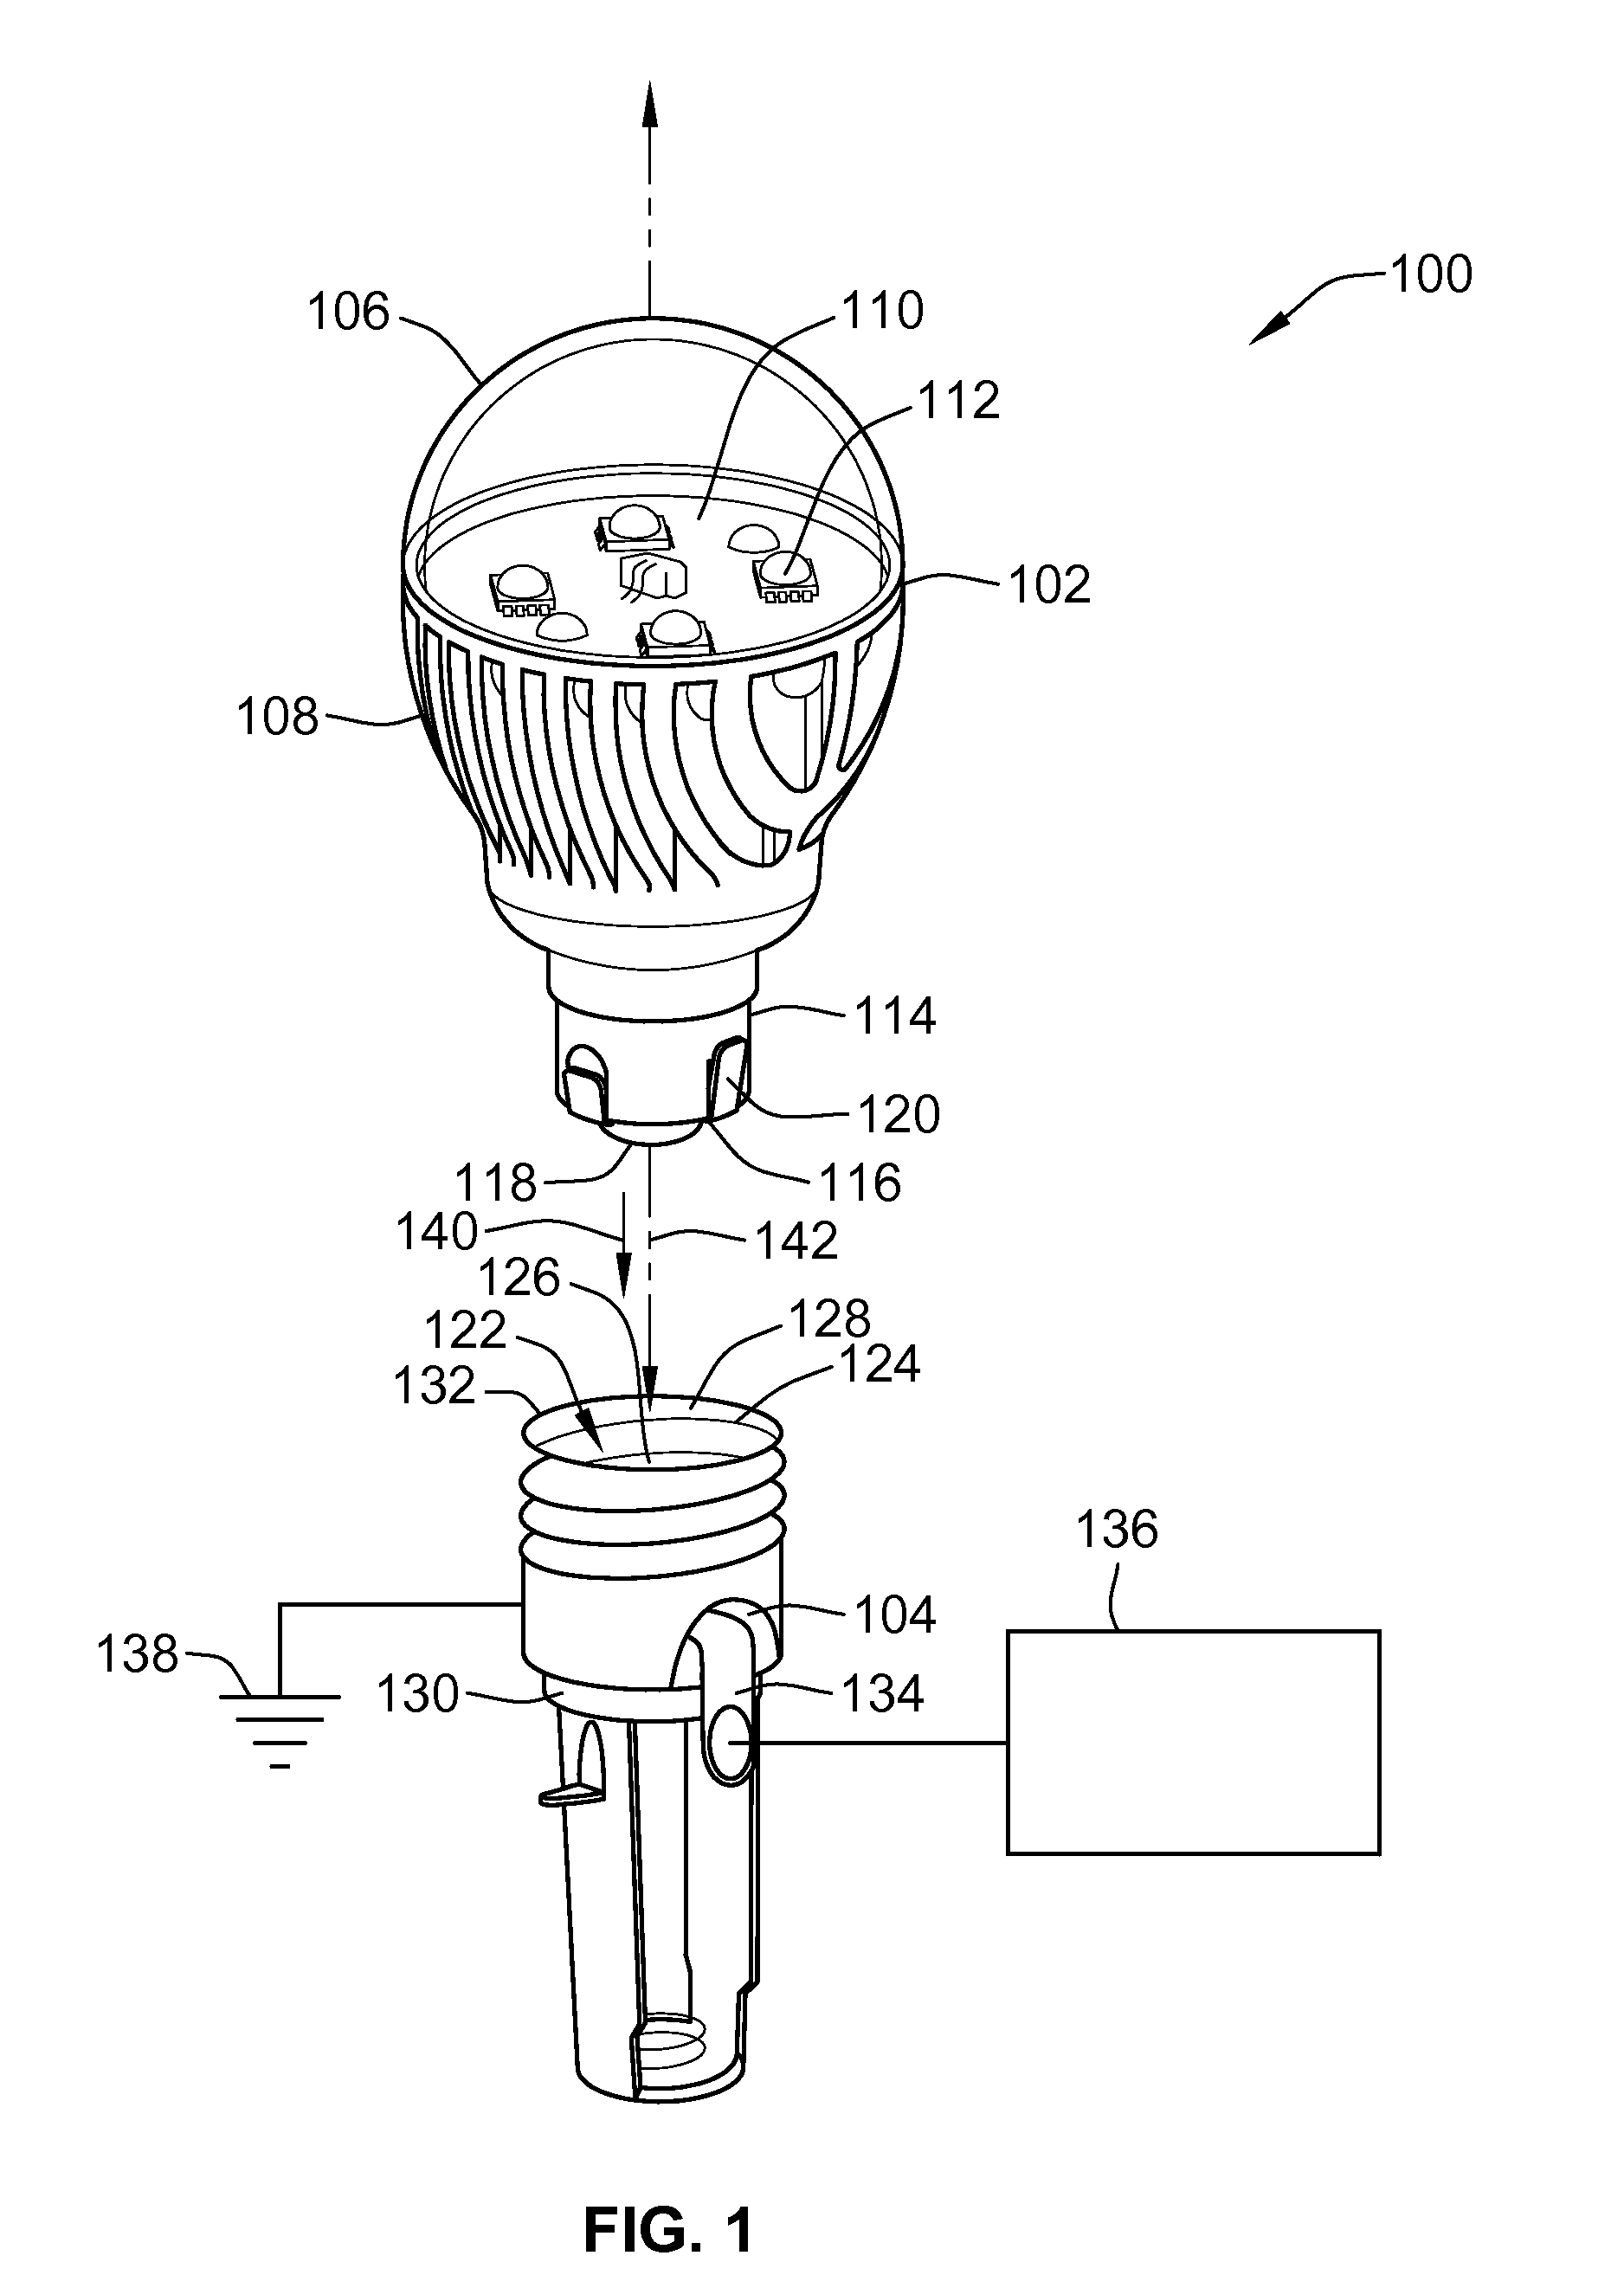 Quick insertion lamp assembly